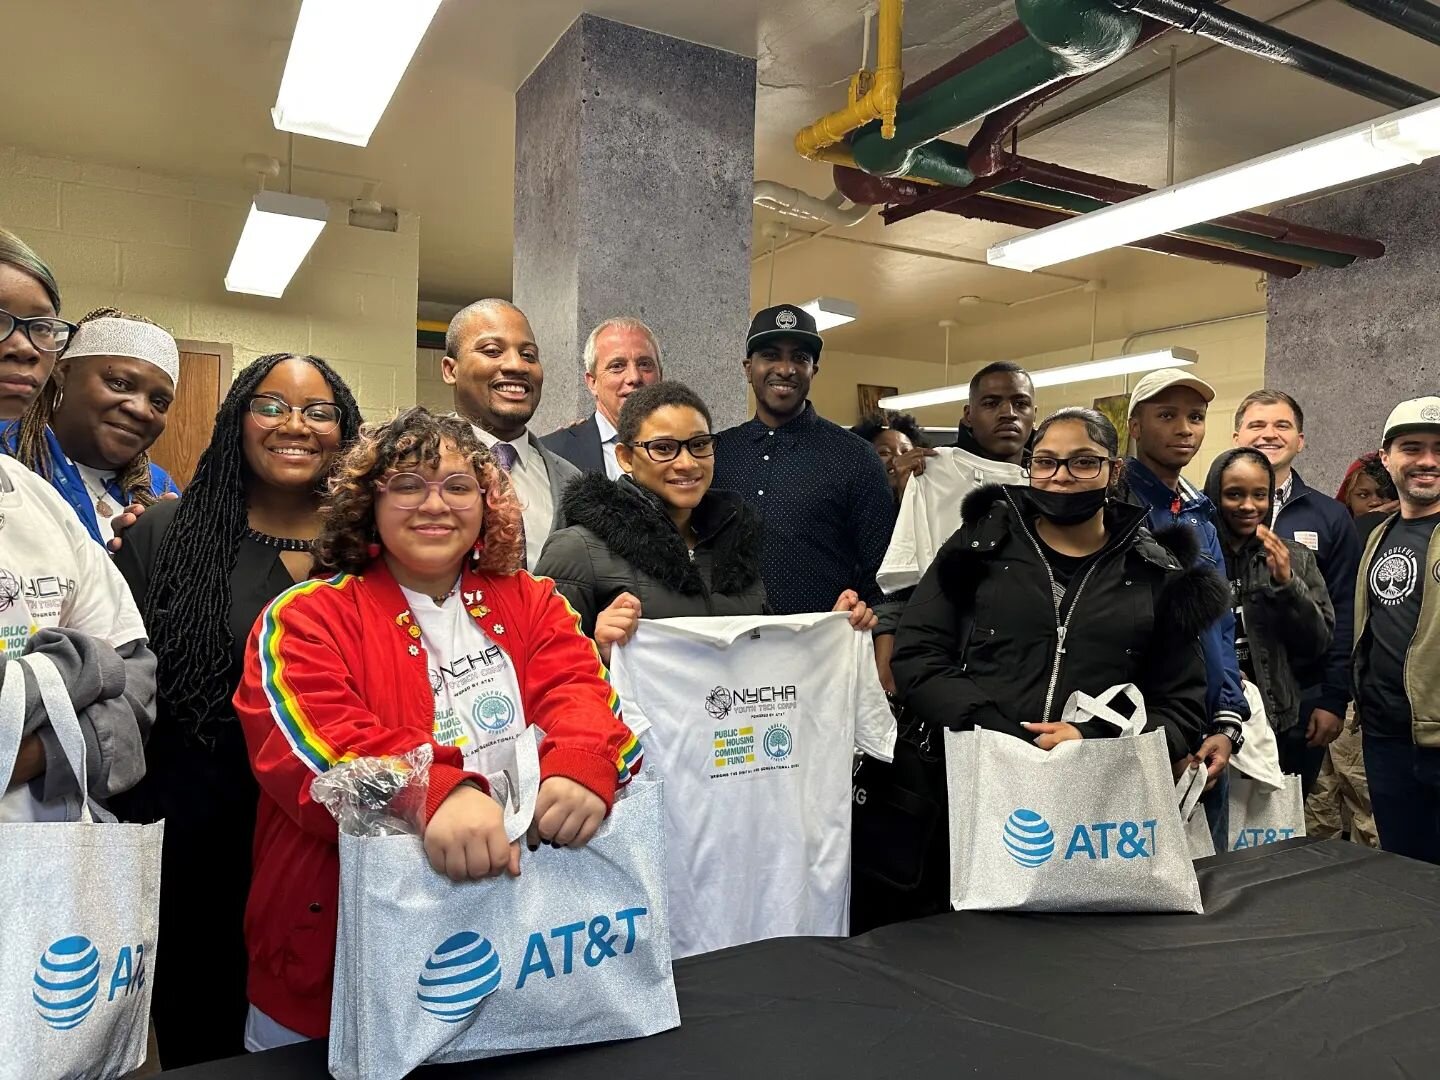 The Public Housing Community Fund, NYCHA (@nychagram), and AT&amp;T (@att) announce the launch of NYCHA Youth Tech Corps Powered by AT&amp;T, an intergenerational #leadershipdevelopment program aiming to give youth living in #publichousing critical t